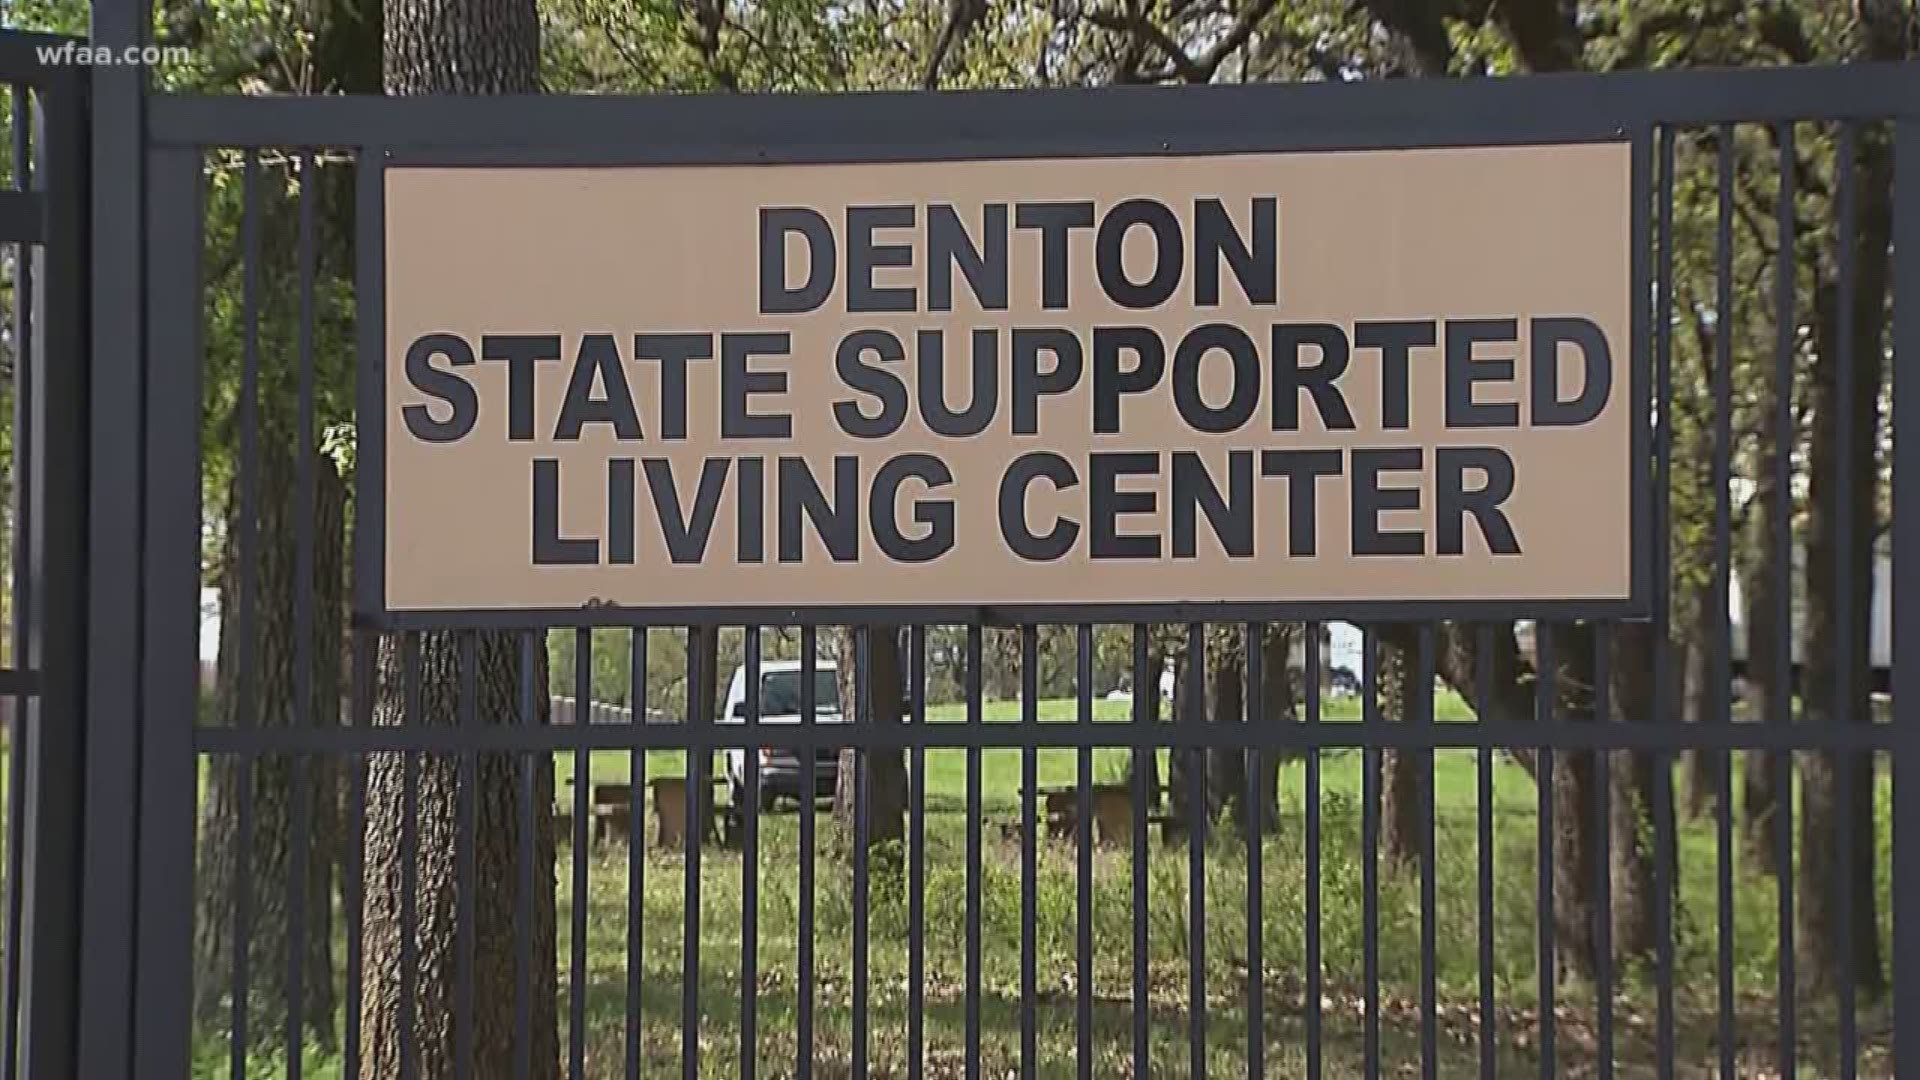 Denton officials say 39 residents tested positive for COVID19 at a